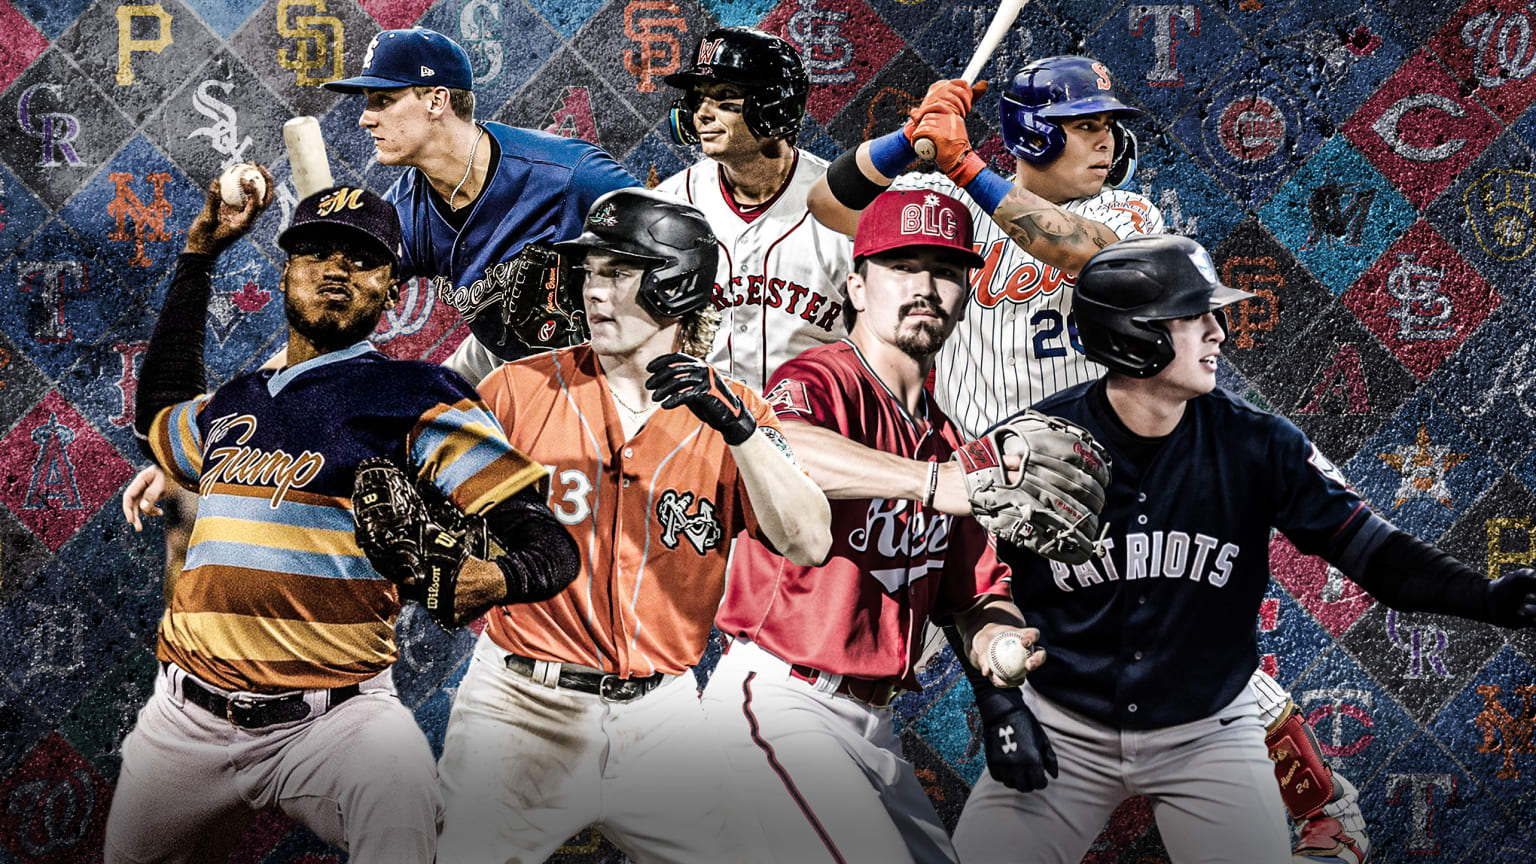 7 players in a cluster against a background of MLB team logos